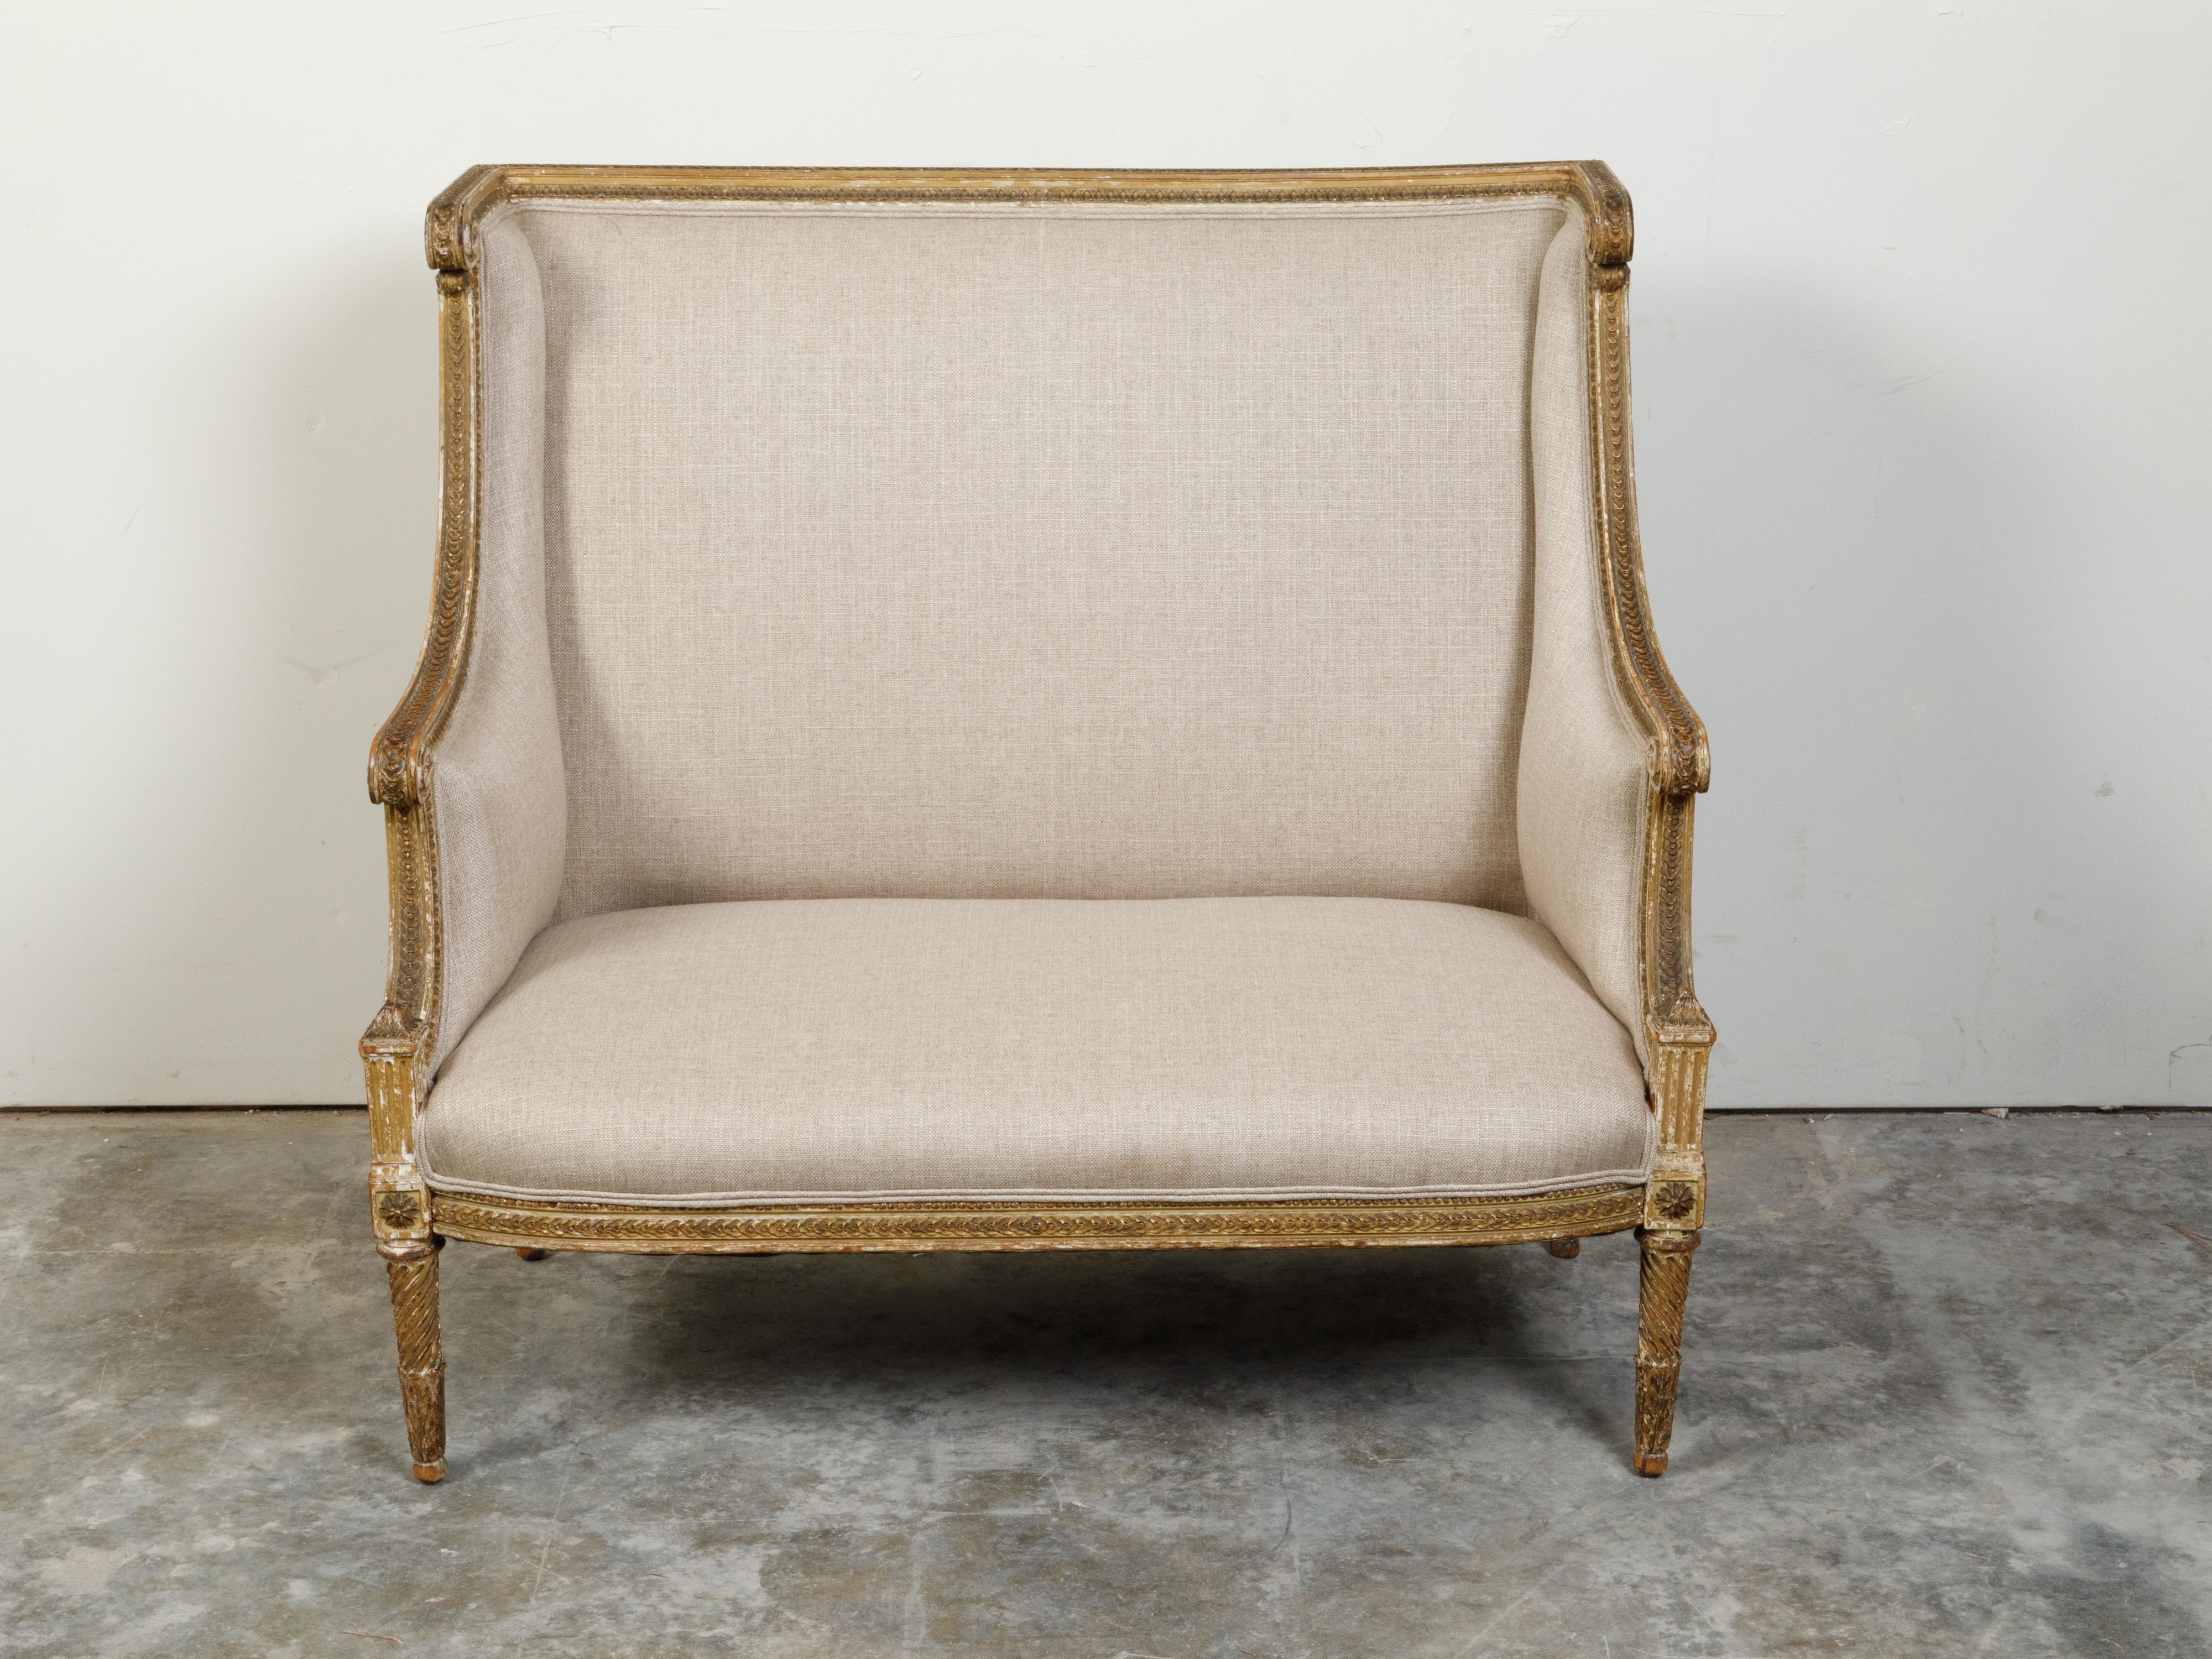 A French Louis XVI style giltwood wingback settee from the 19th century, with carved foliage motifs and distressed patina. Created in France during the 19th century, this giltwood settee features a wingback connected to scrolling arms flanking a